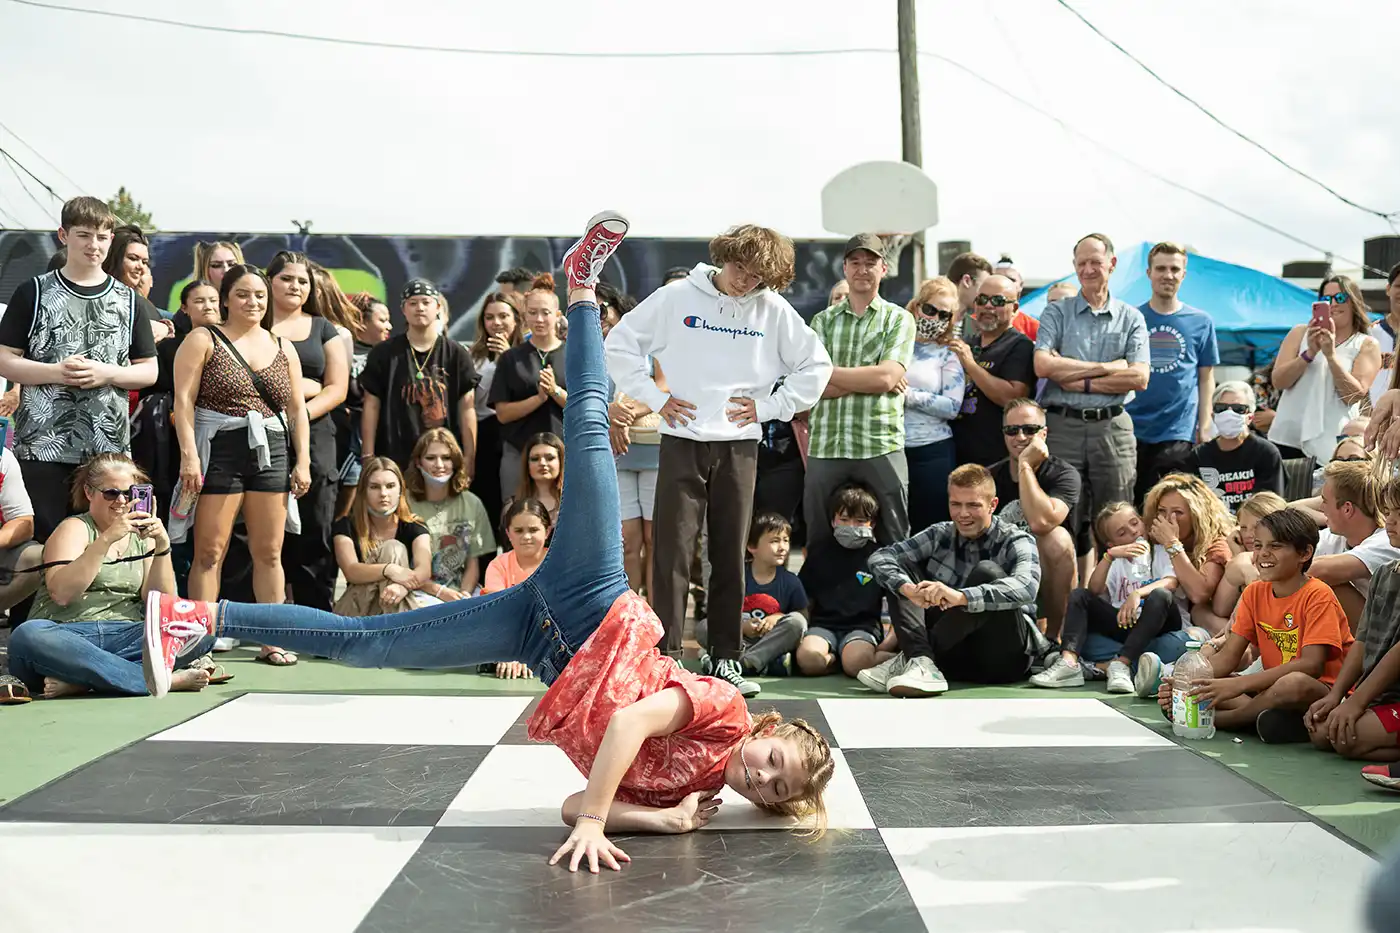 A crowd surrounds a young breakdancer mid dance. Photo courtesy of 1520 Arts.